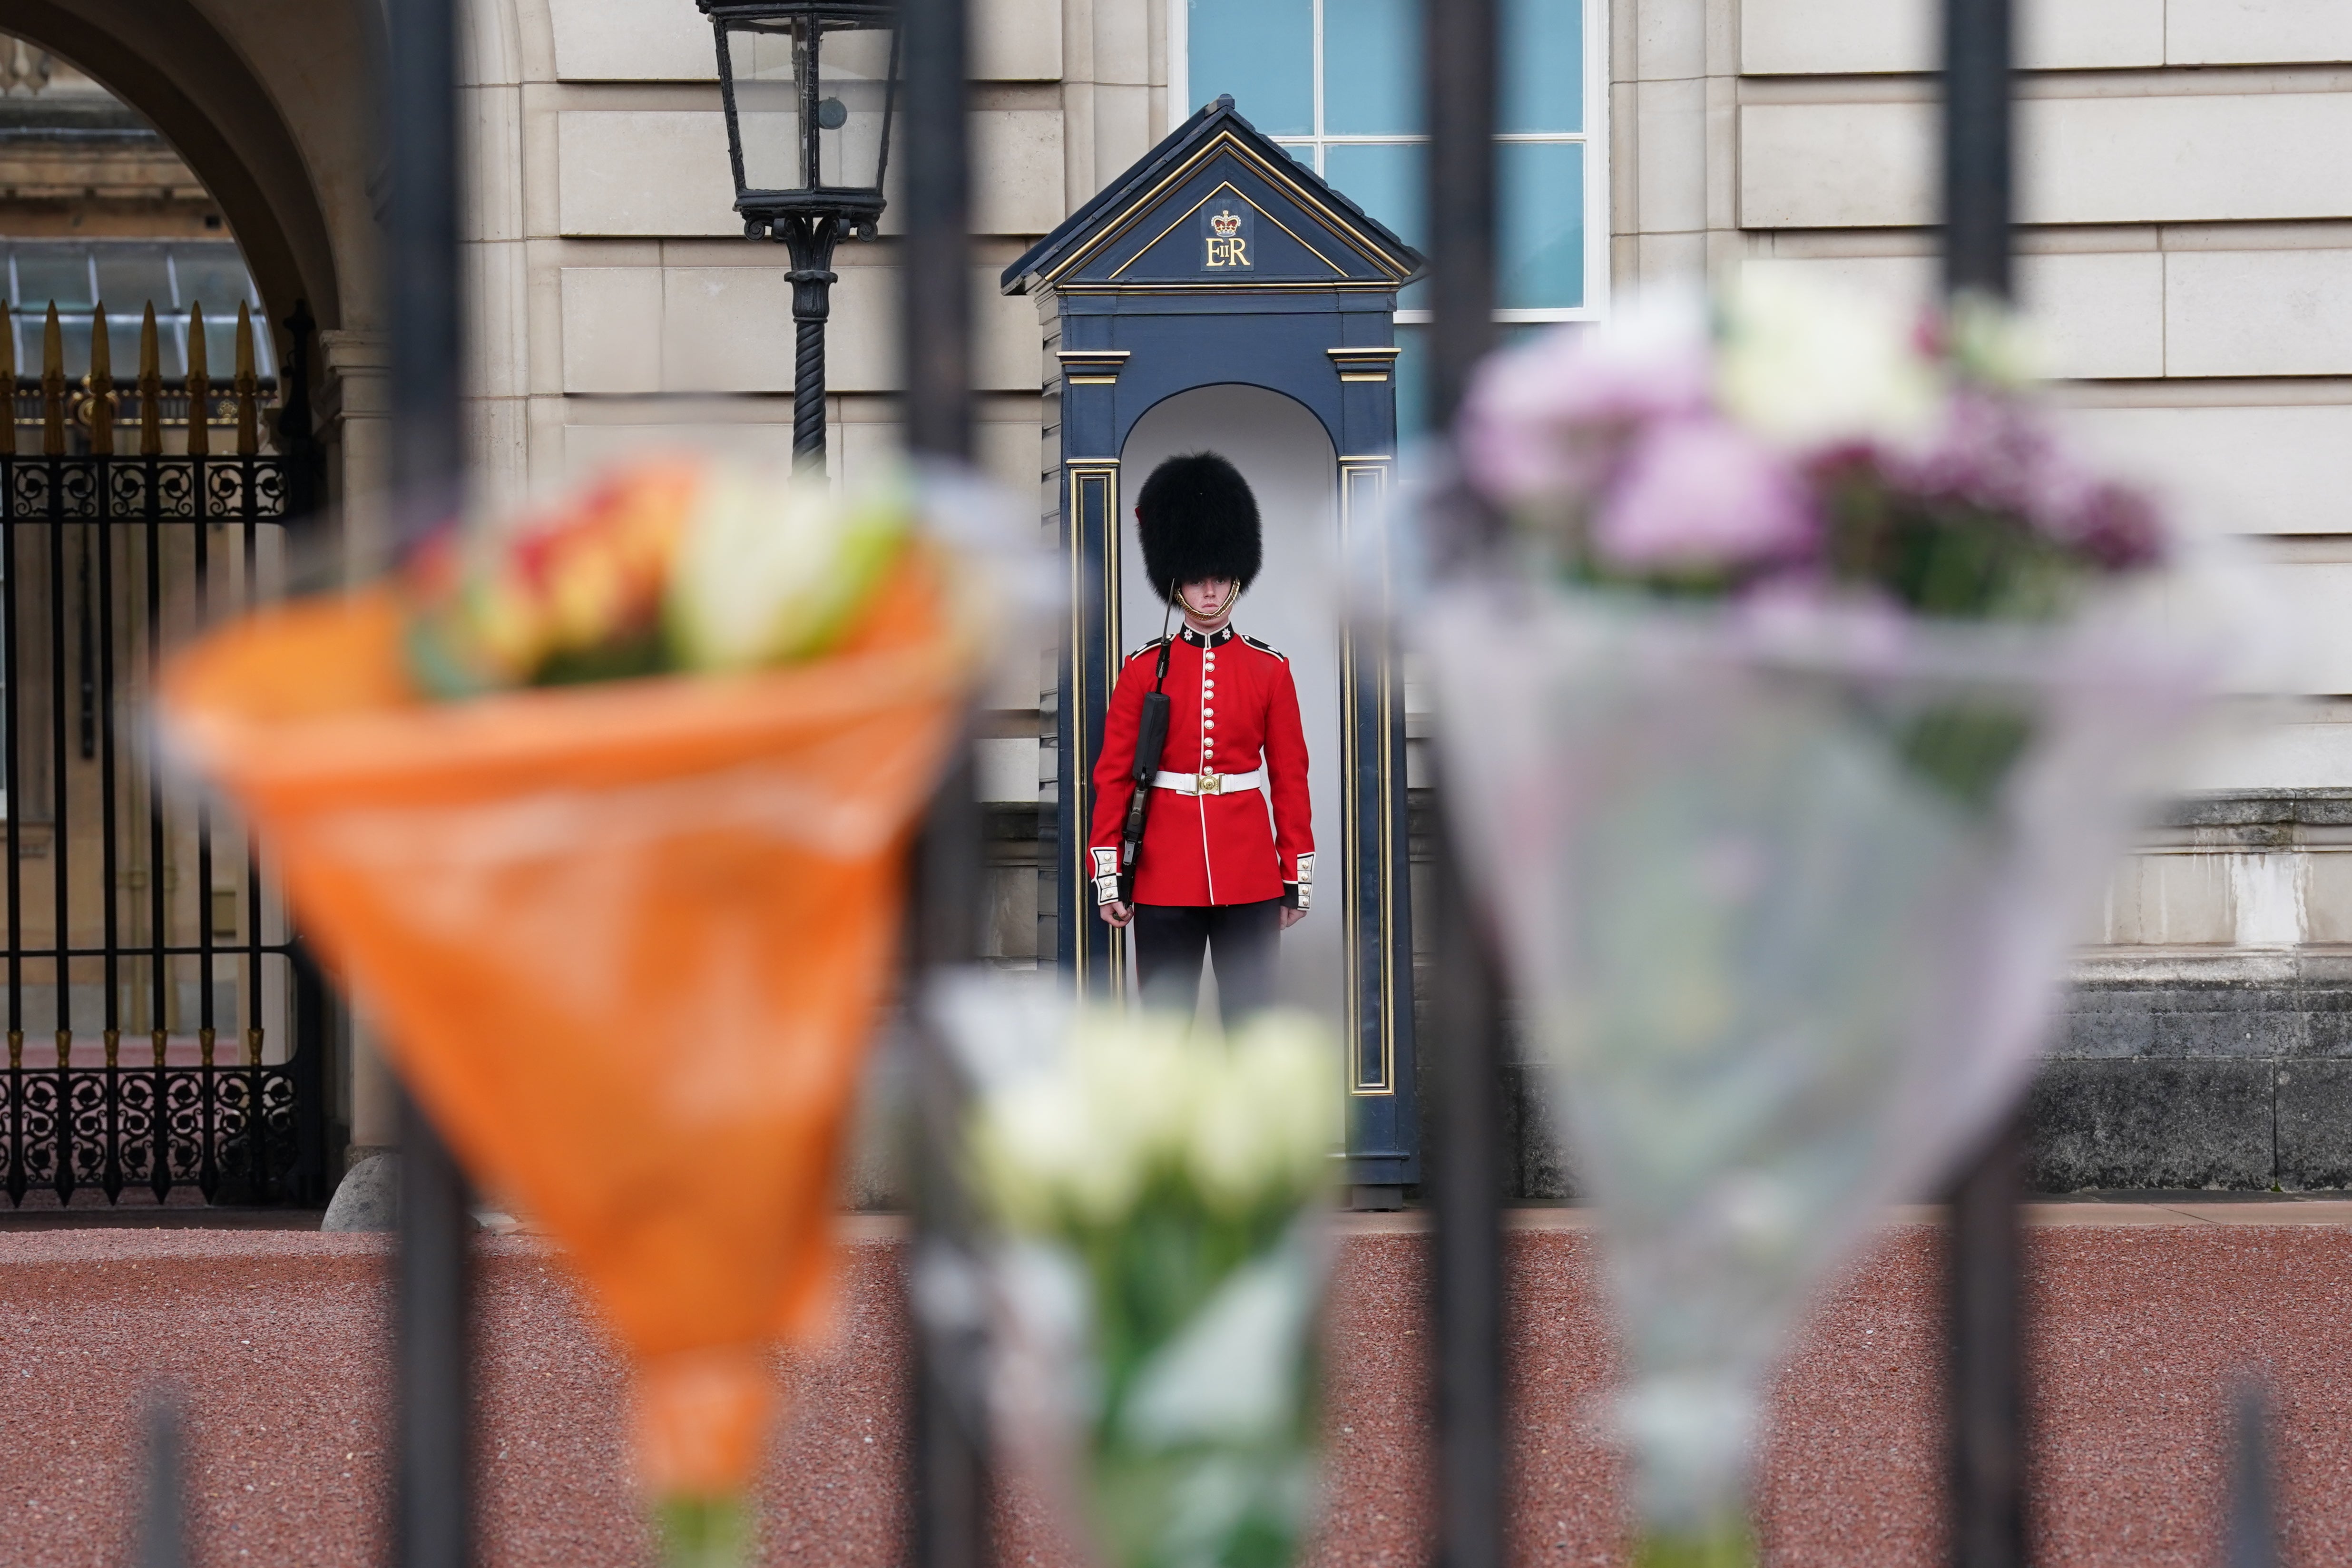 Bouquets of flowers left on the gates at Buckingham Palace (Kirsty O’Connor/PA)